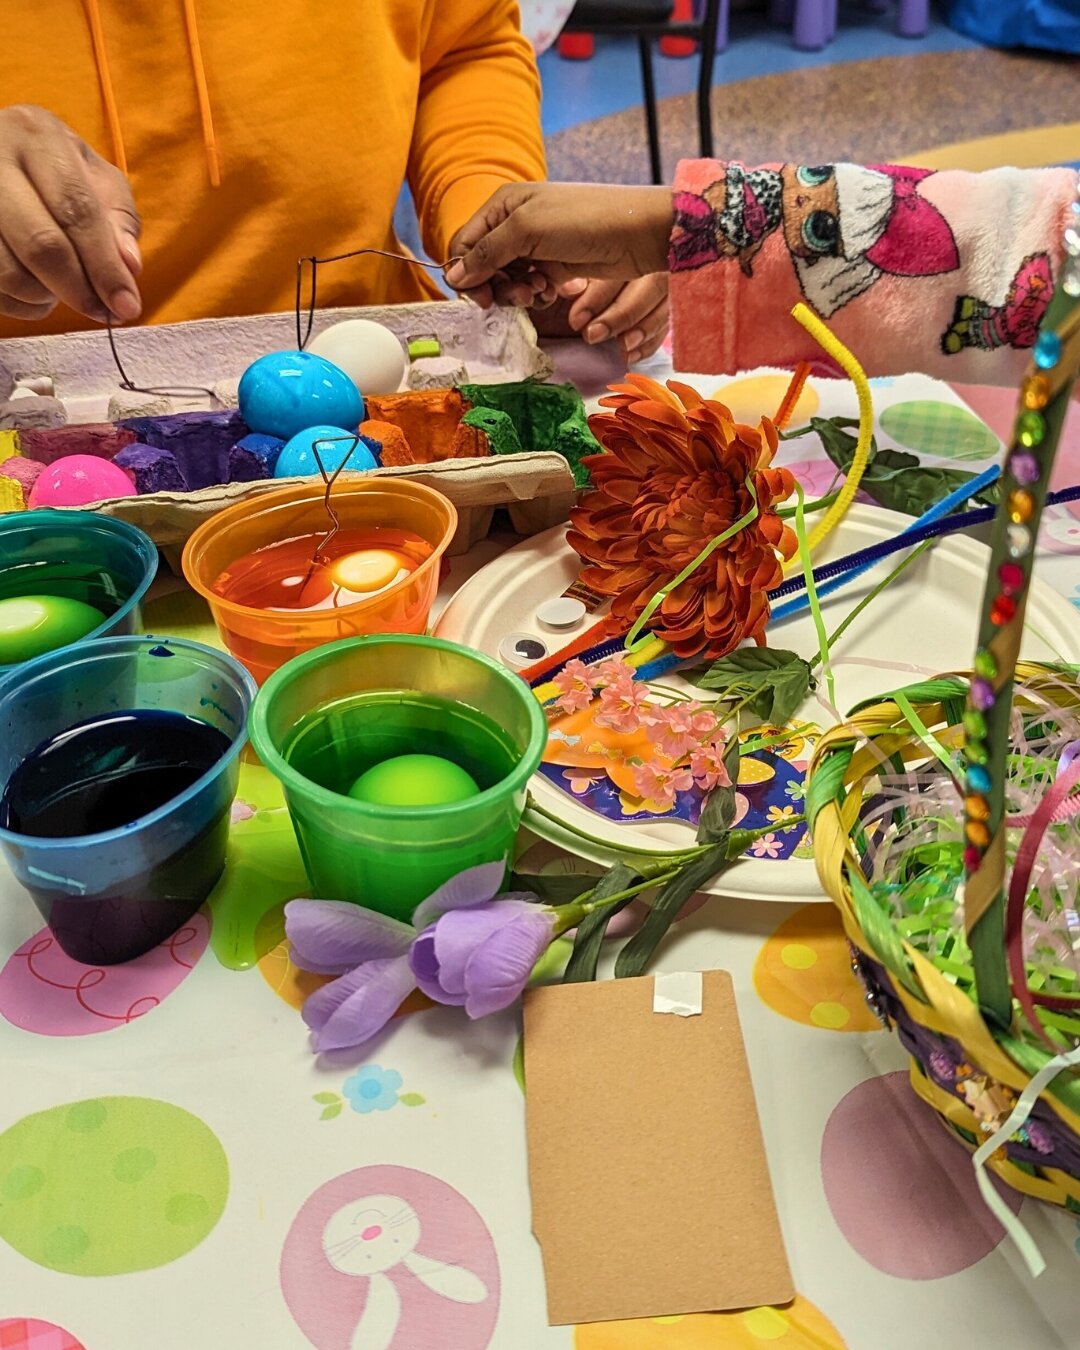 Over the past week, there has been a number of fun Easter activities at WINGS for the families!  The children and moms got busy dying eggs and creating beautiful Easter crafts, and there was an Easter party as well, with delicious treats! 

We also r